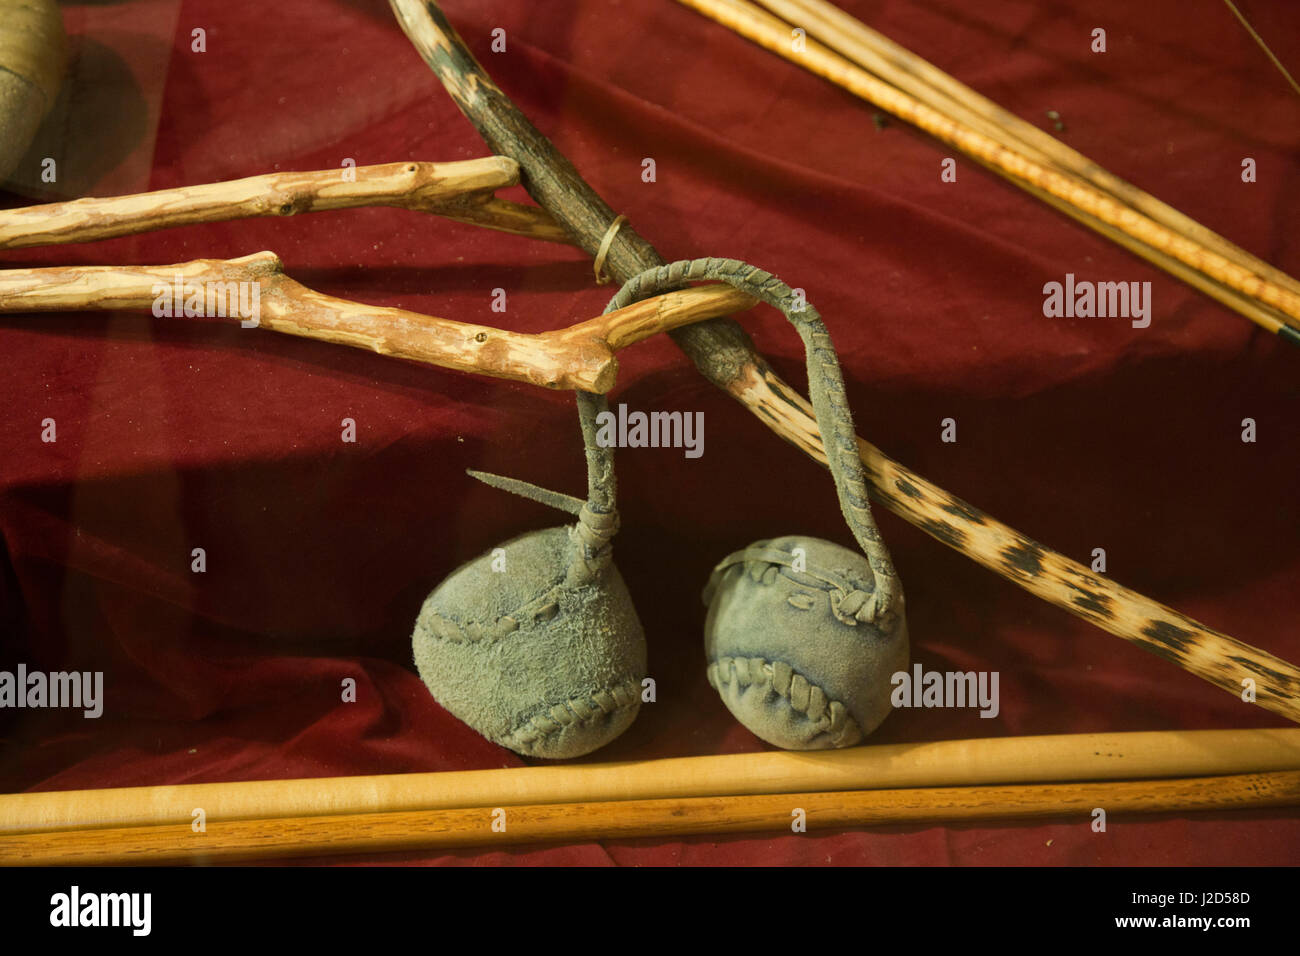 The double ball game, popular by Iroquois, was played by women. The game resembled lacrosse. The double ball was composed of two small oblong deerskin bags joined together by an eight-inch deerskin thong. Stock Photo